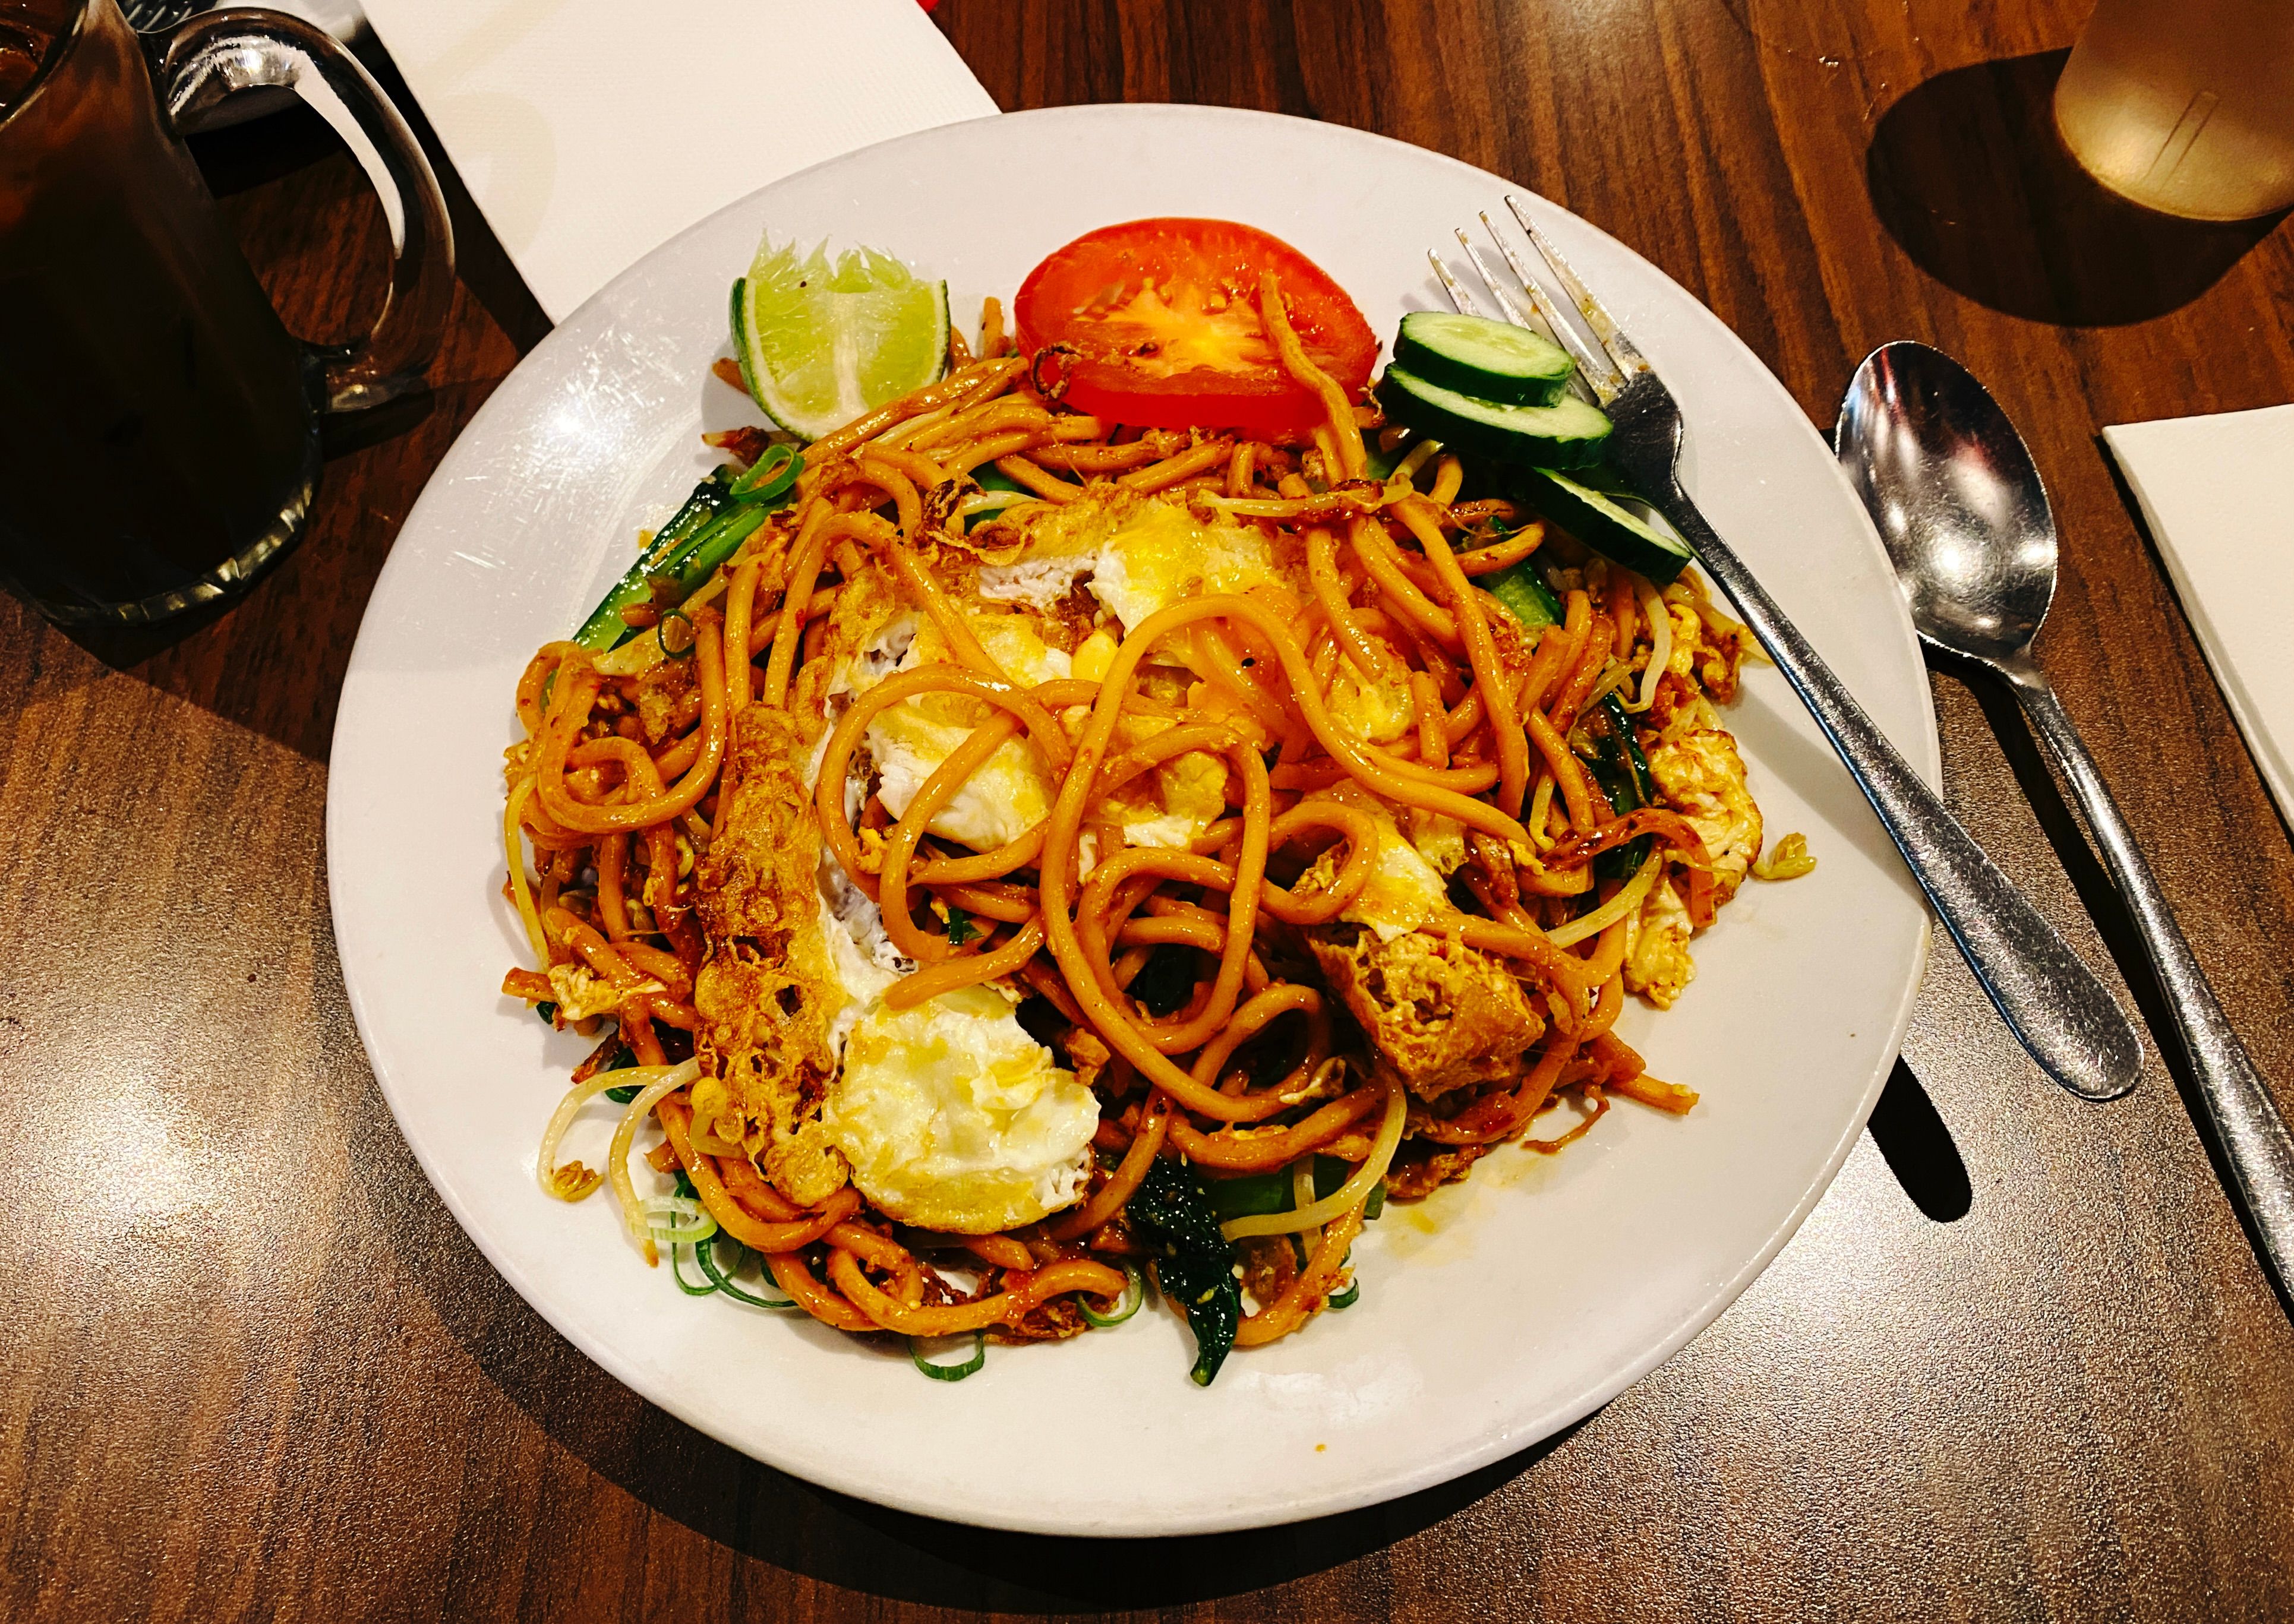 A photo of a plate of mee goreng, a noodle dish, that has a fried egg mixed into it.